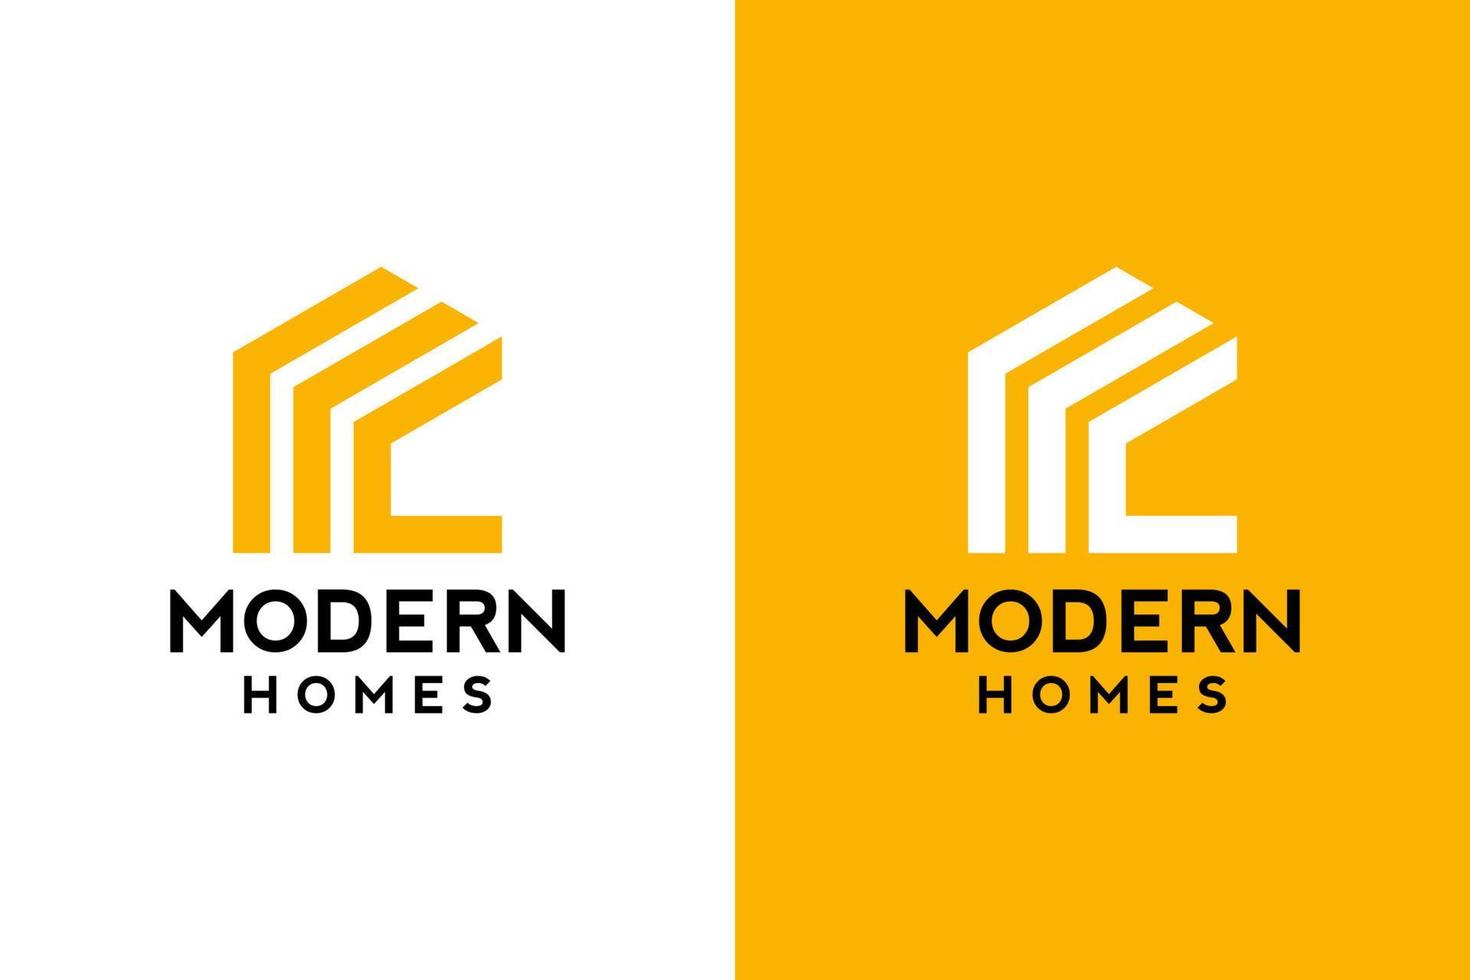 Logo design of L in vector for construction, home, real estate, building, property. Minimal awesome trendy professional logo design template on double background.